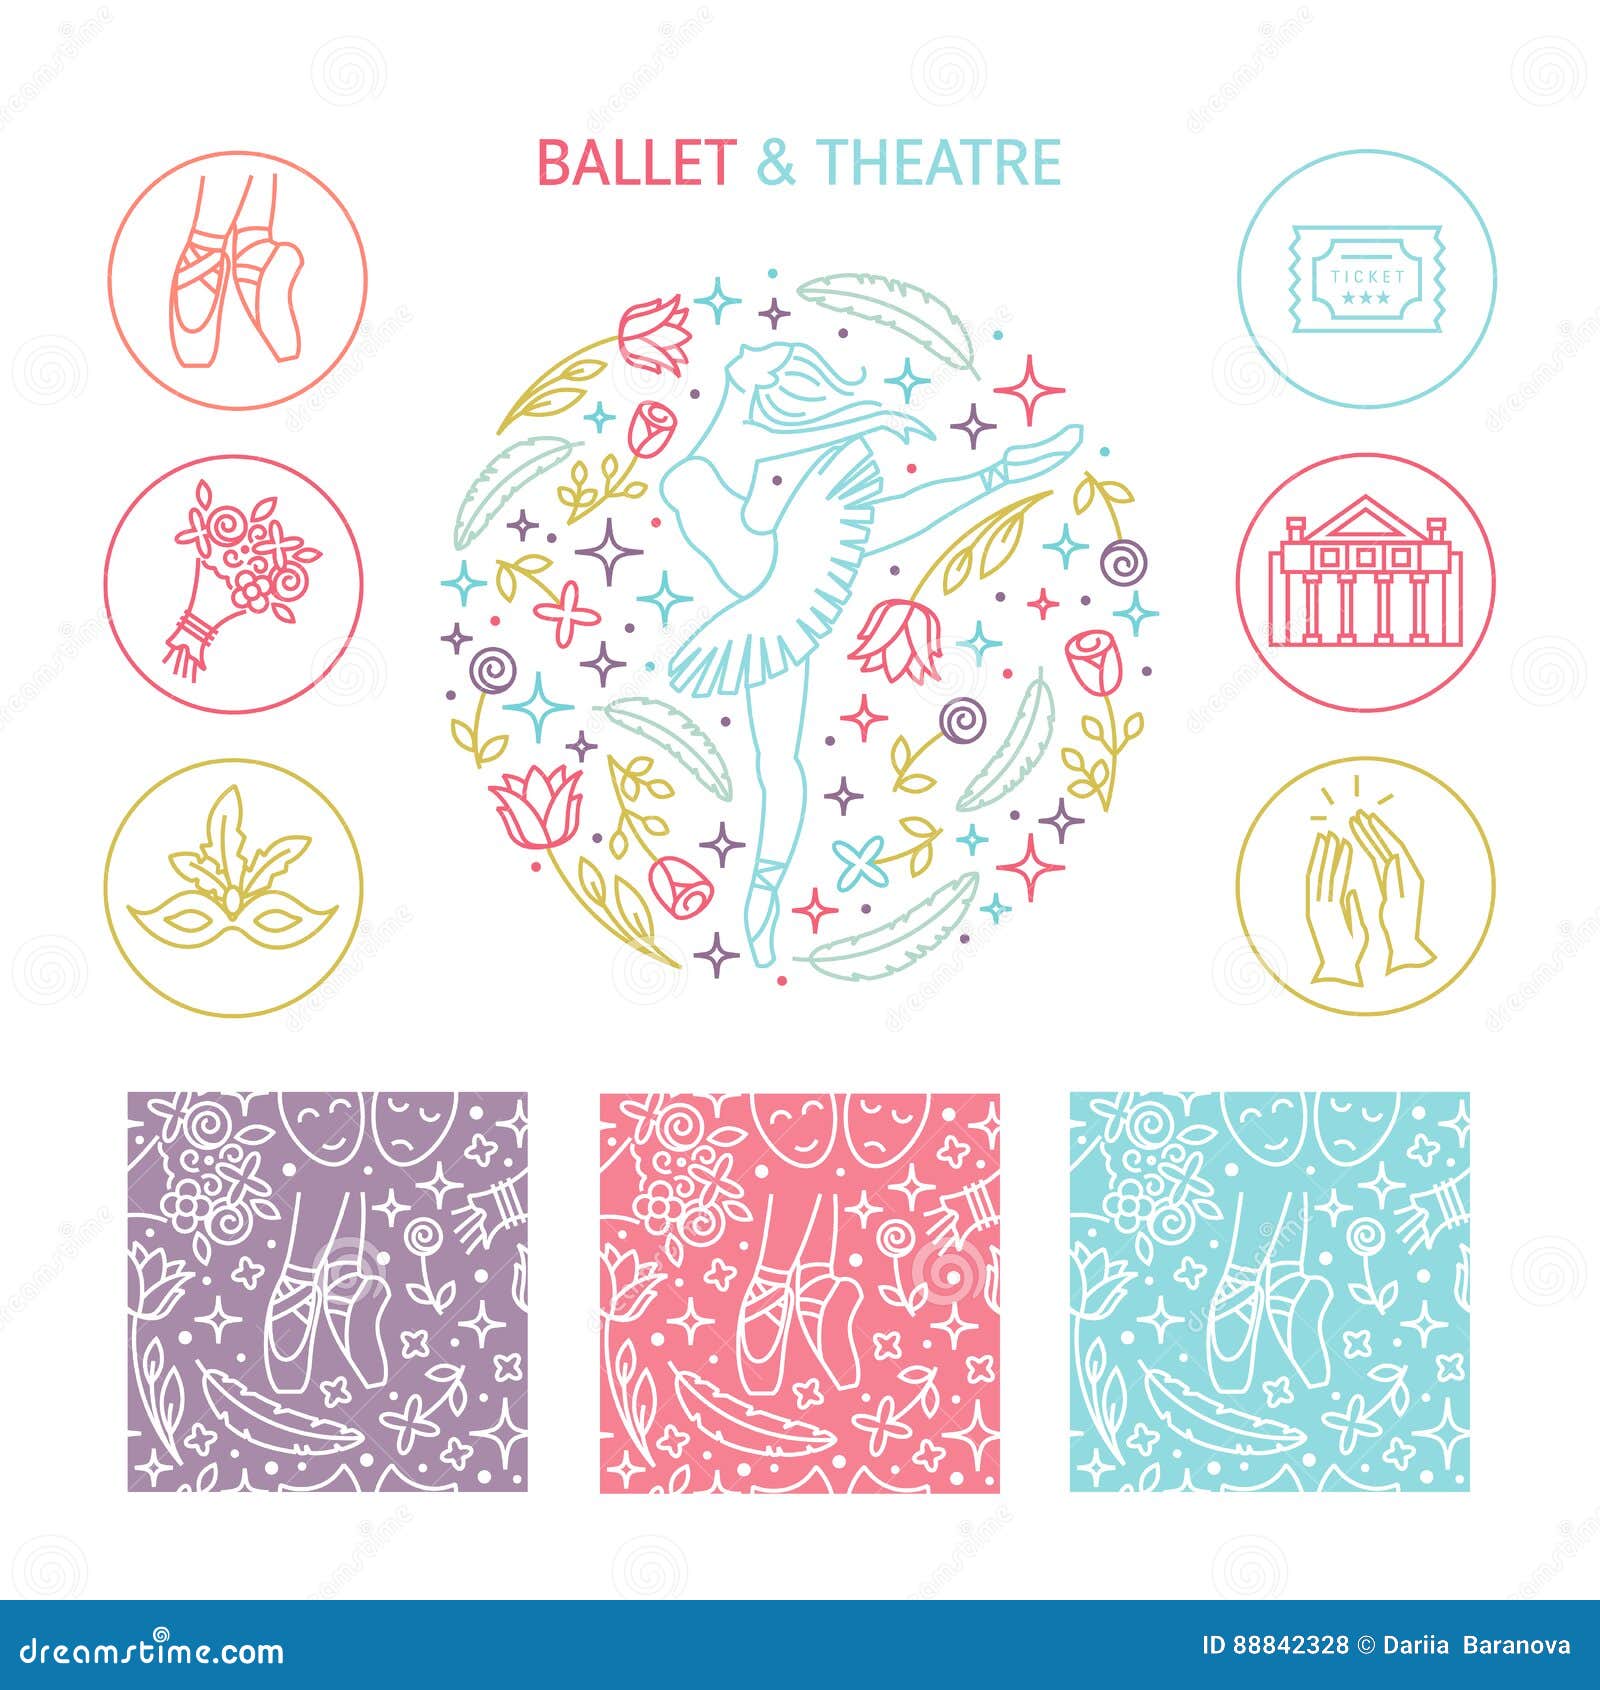 Ballerina Dancer Vector Art, Icons, and Graphics for Free Download